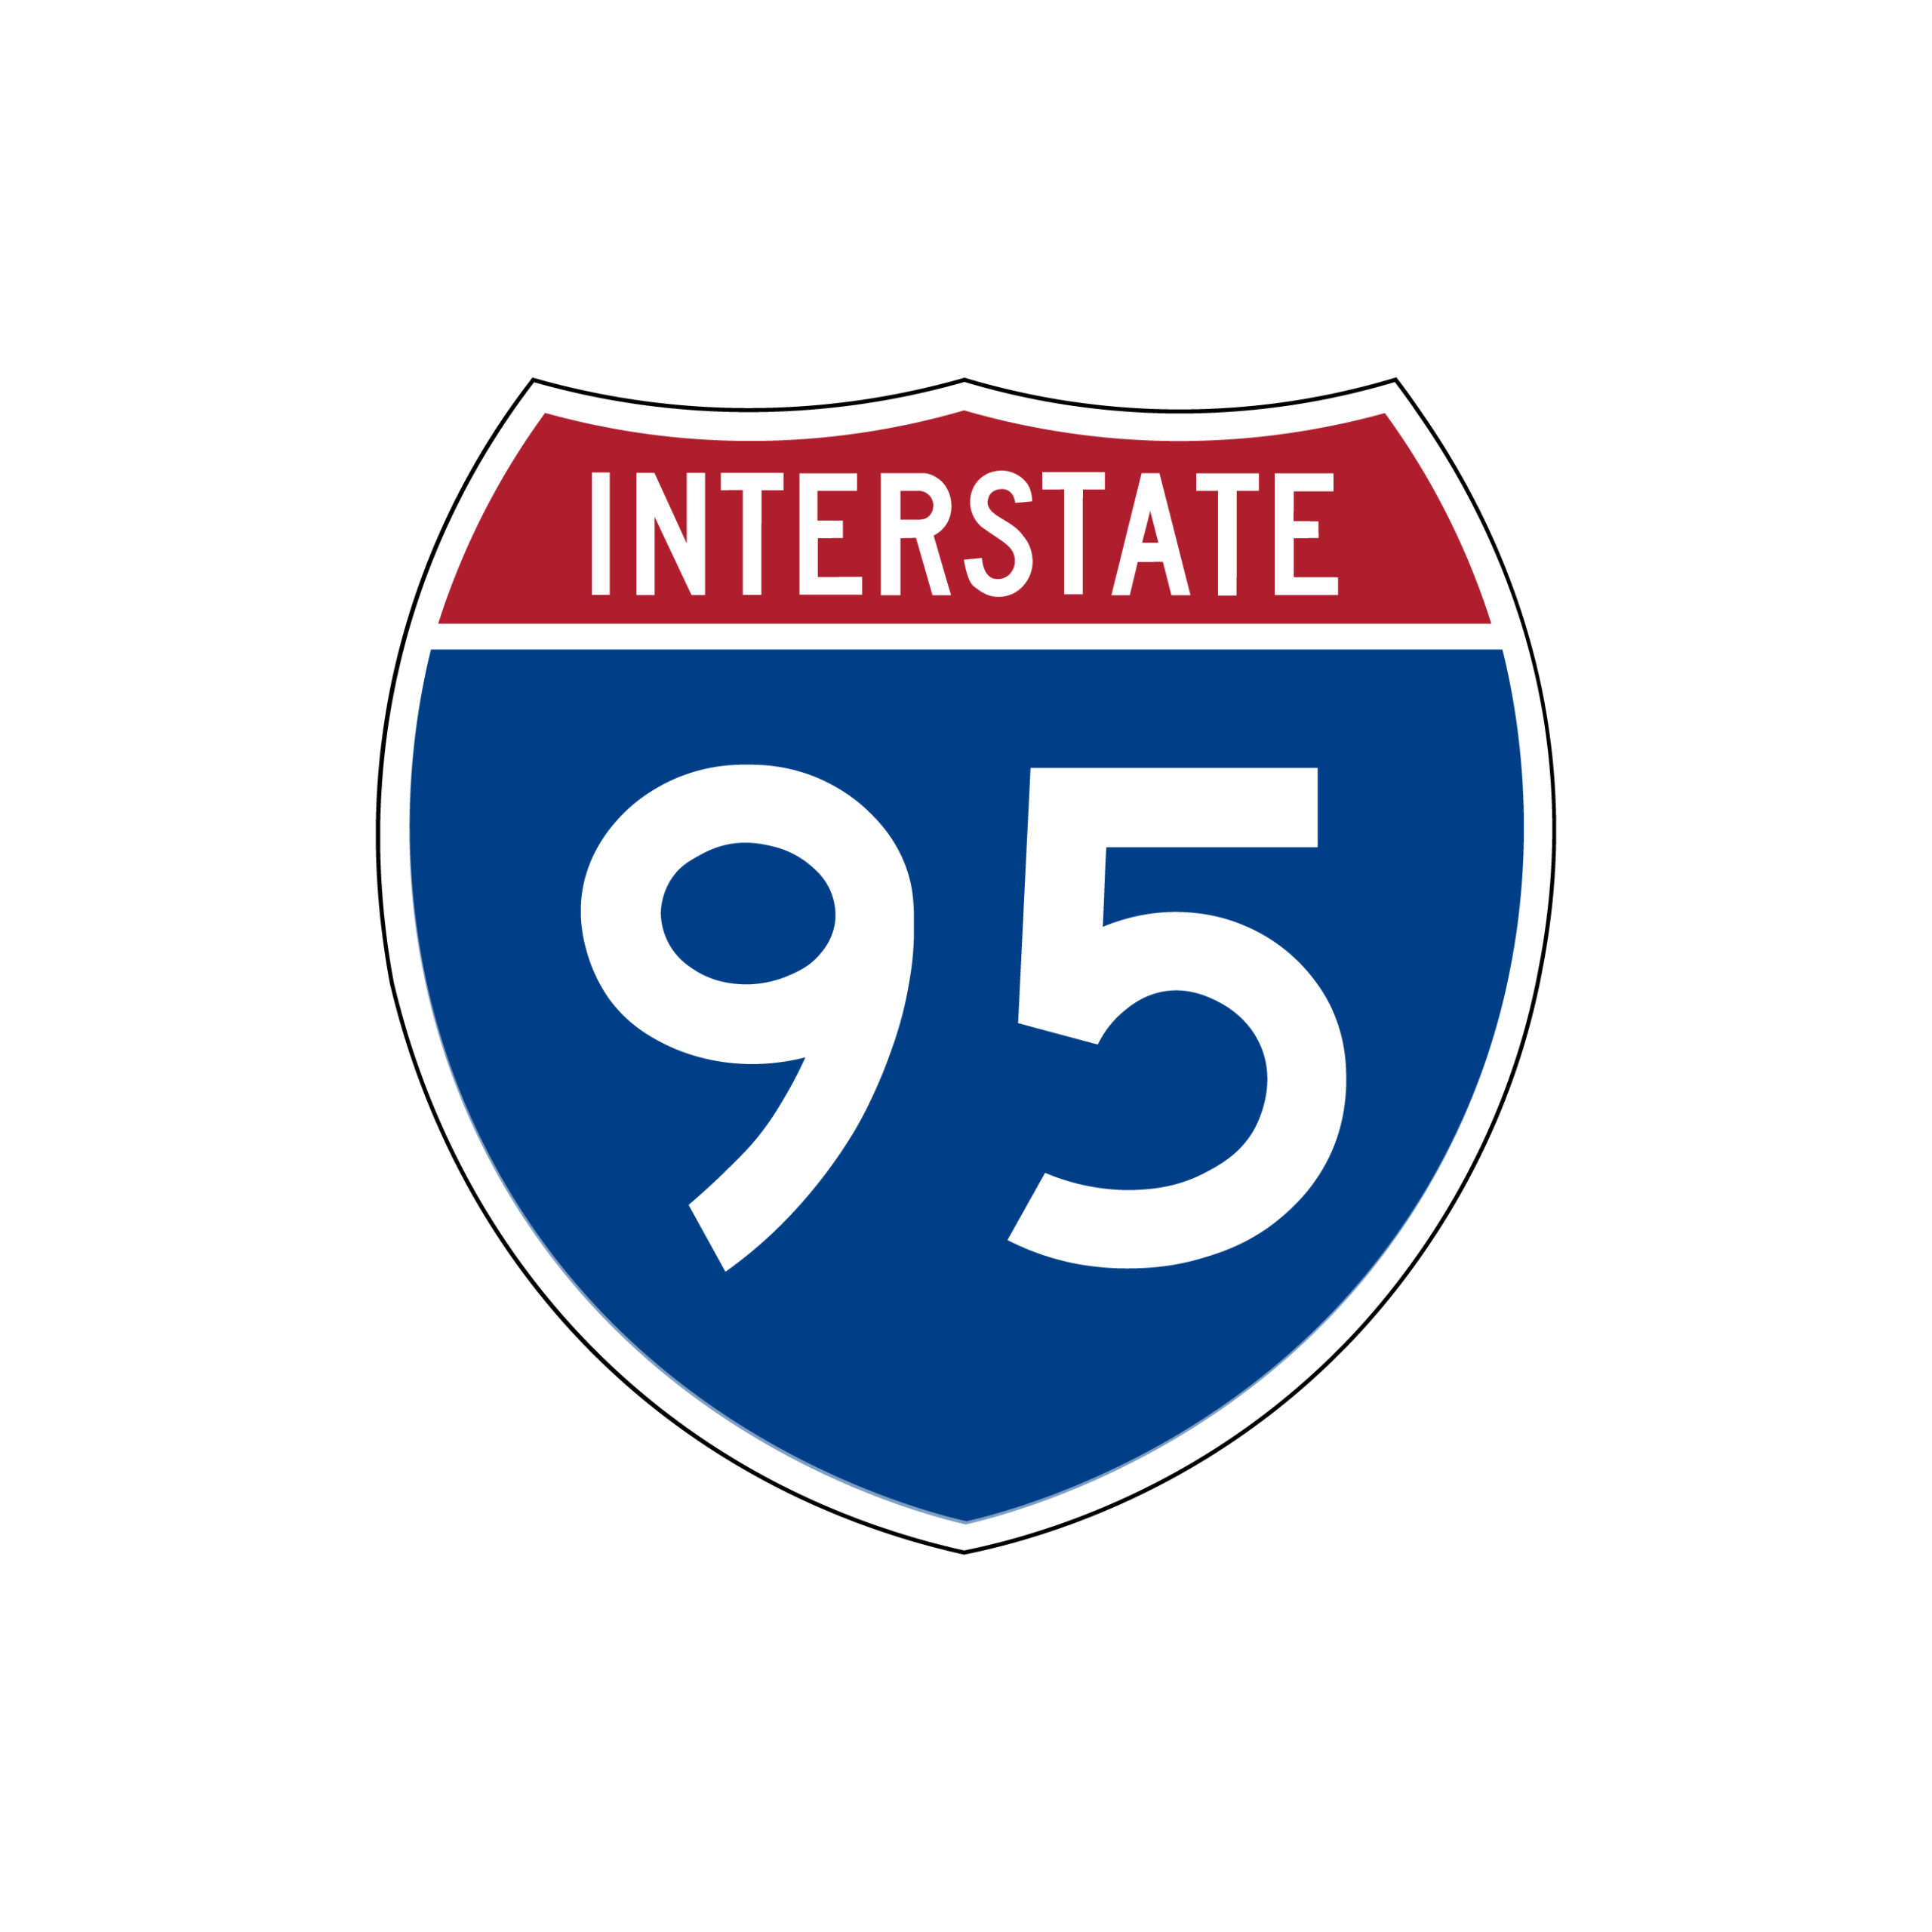 interstate 95 road sign